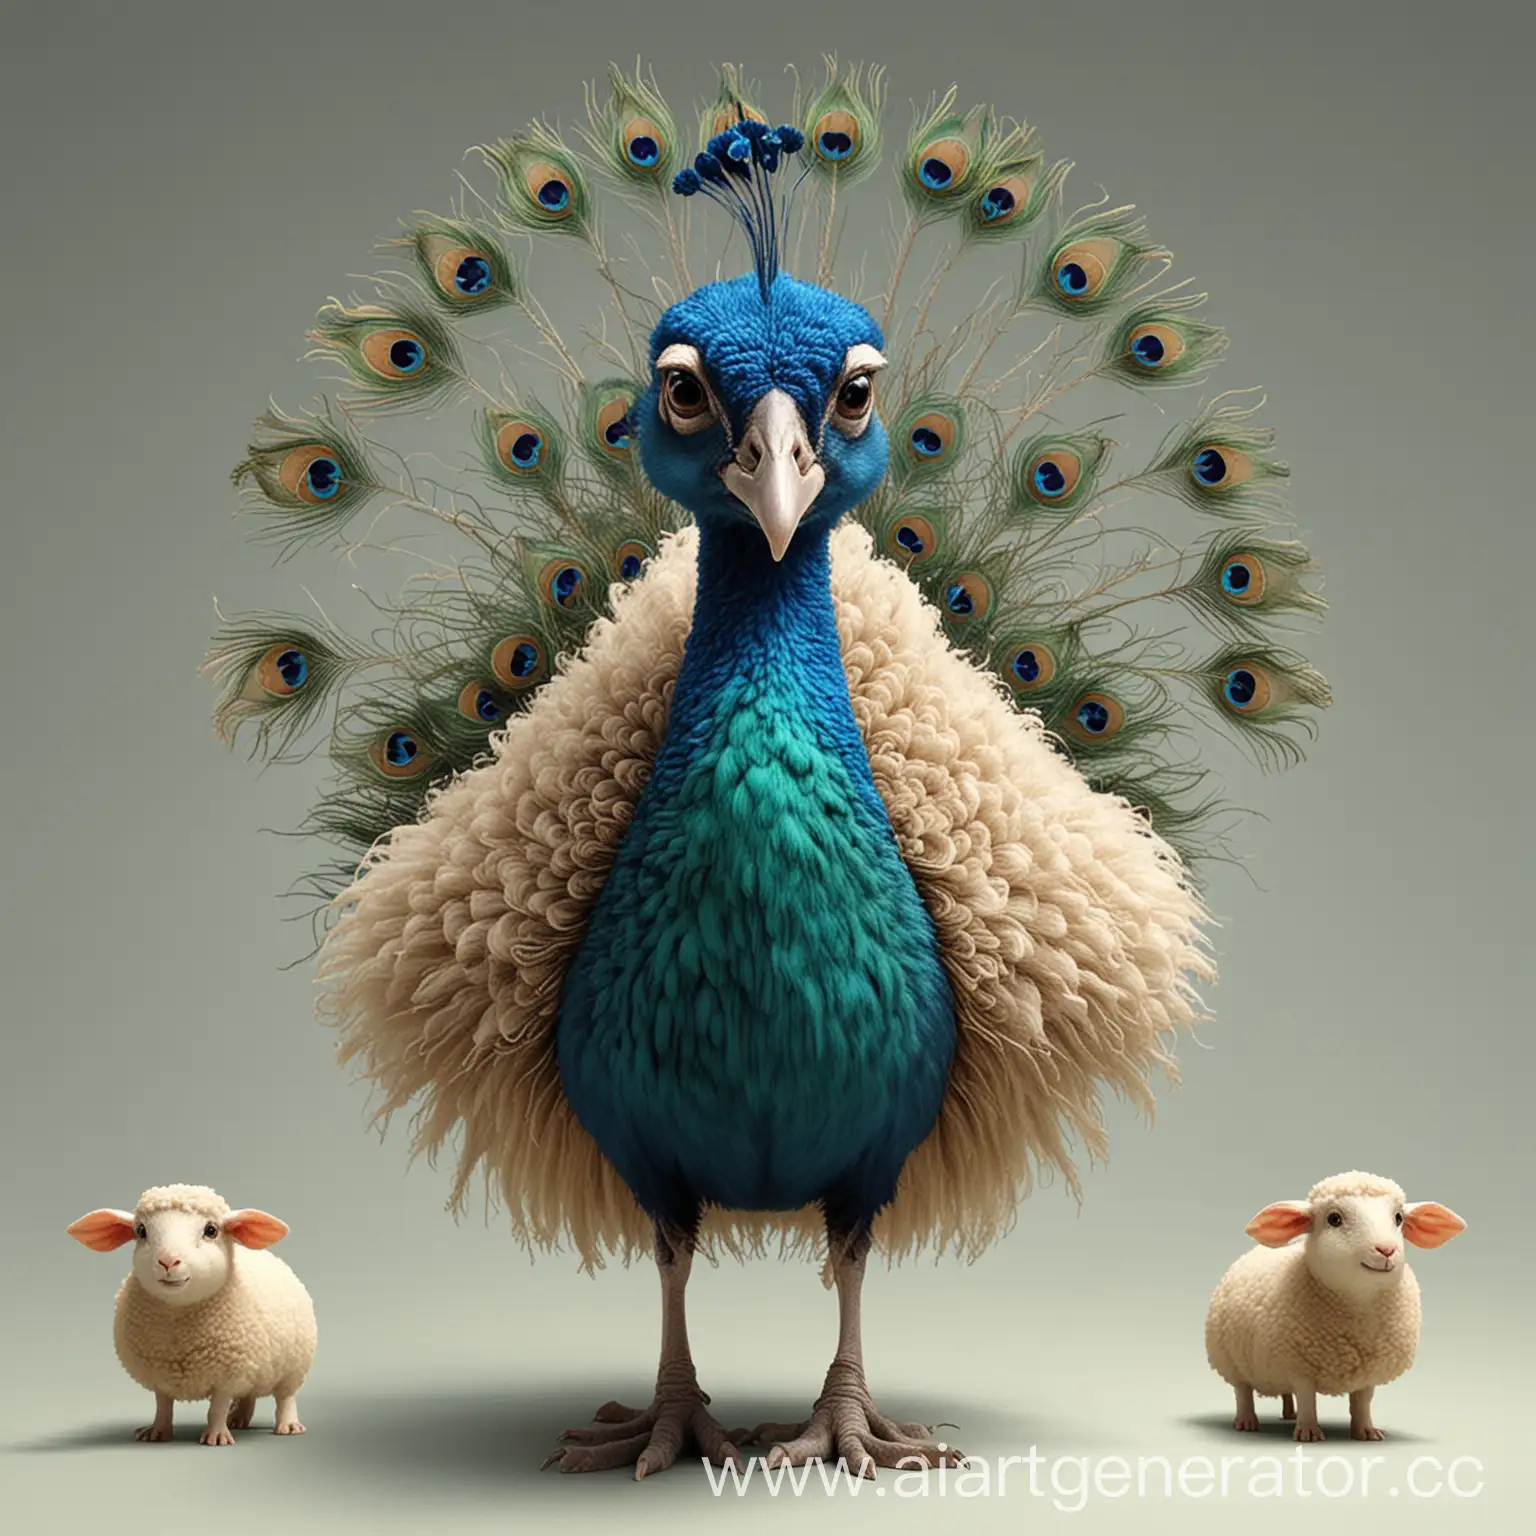 Colorful-Peacock-Surrounded-by-Sheep-and-Gerbil